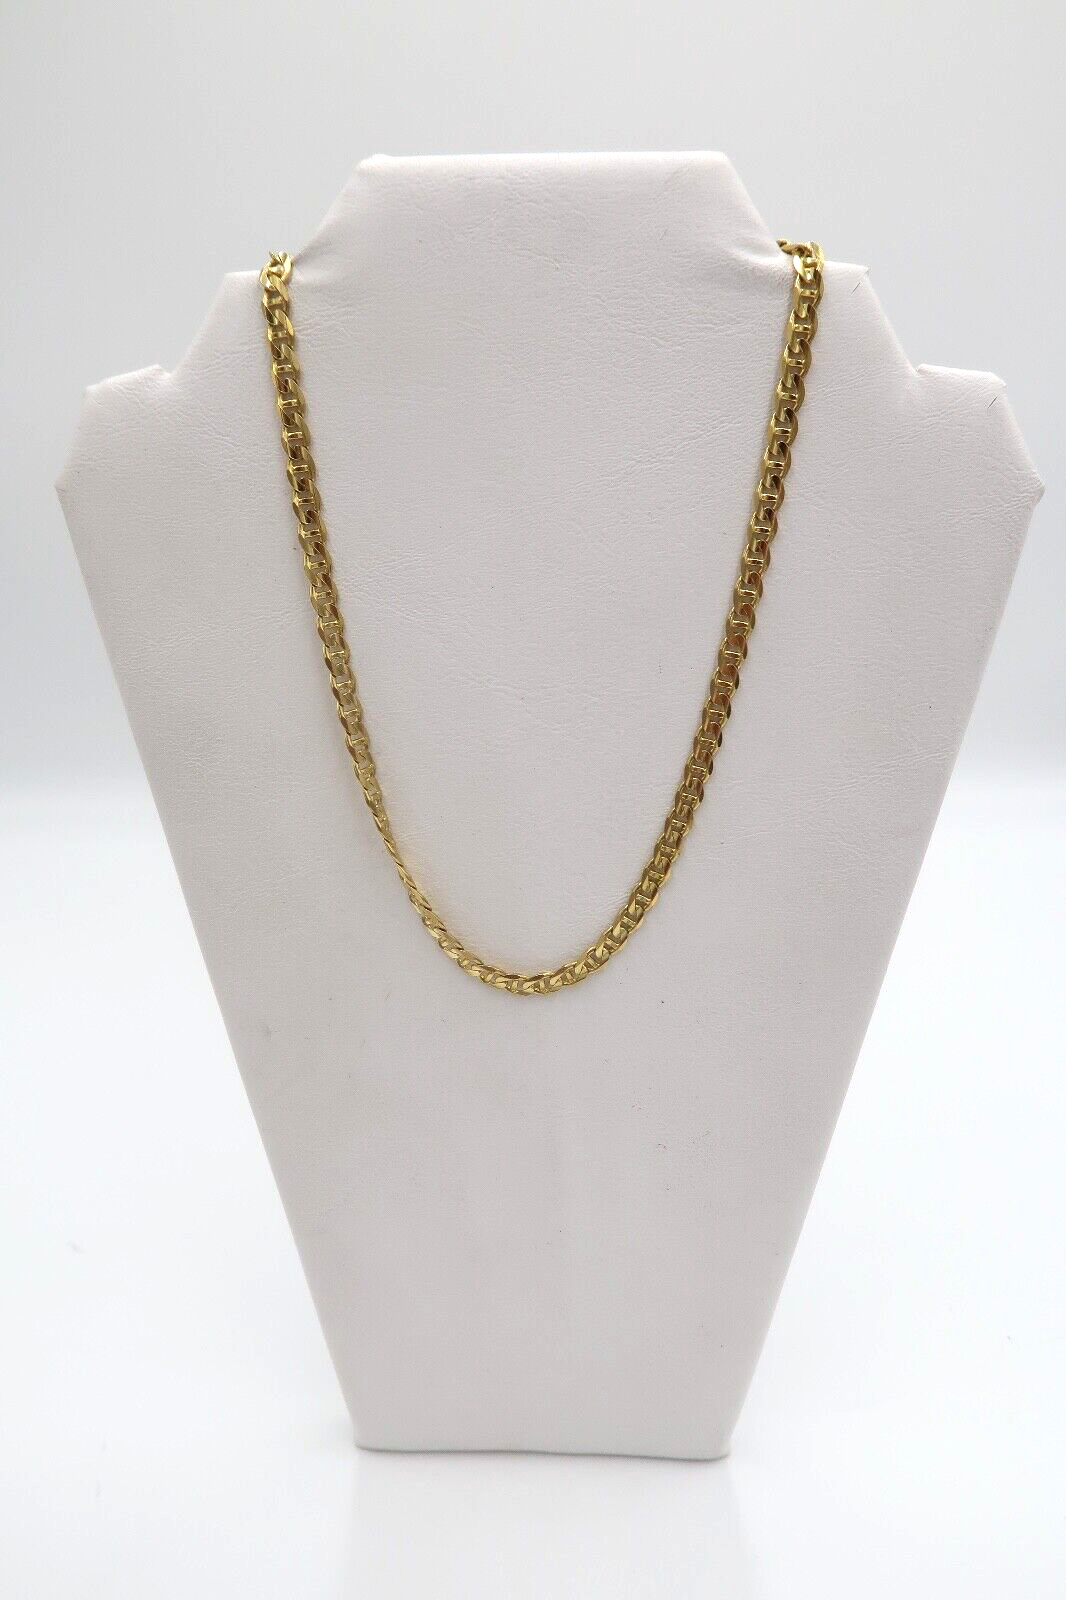 t442 14k Yellow Gold 6mm,18" Anchor Chain Necklace,14k Gold Anchor Chain,Unisex